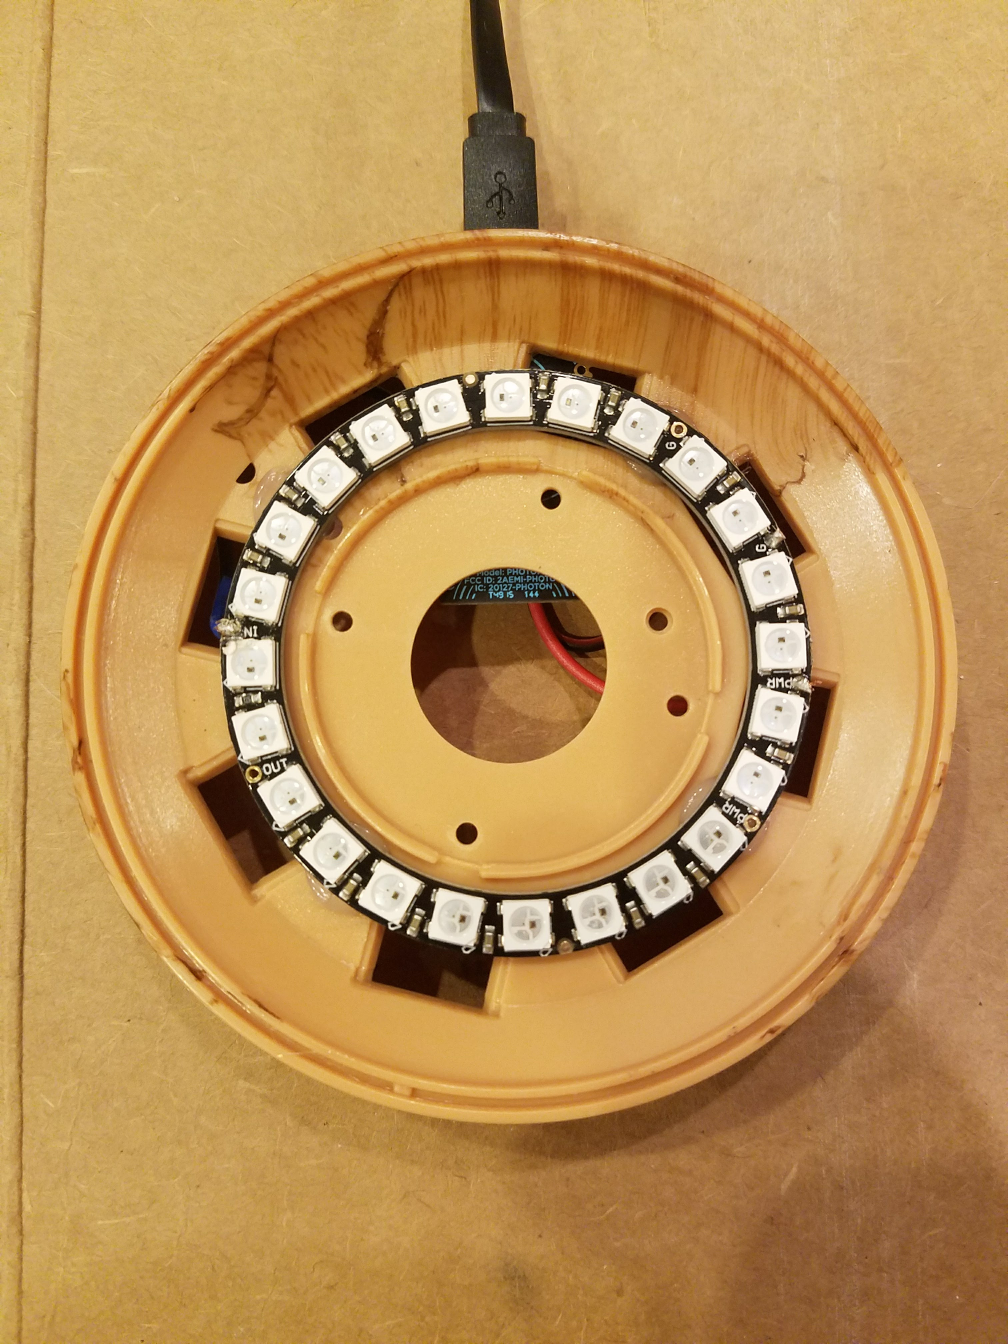 NeoPixel glued to the lamp base